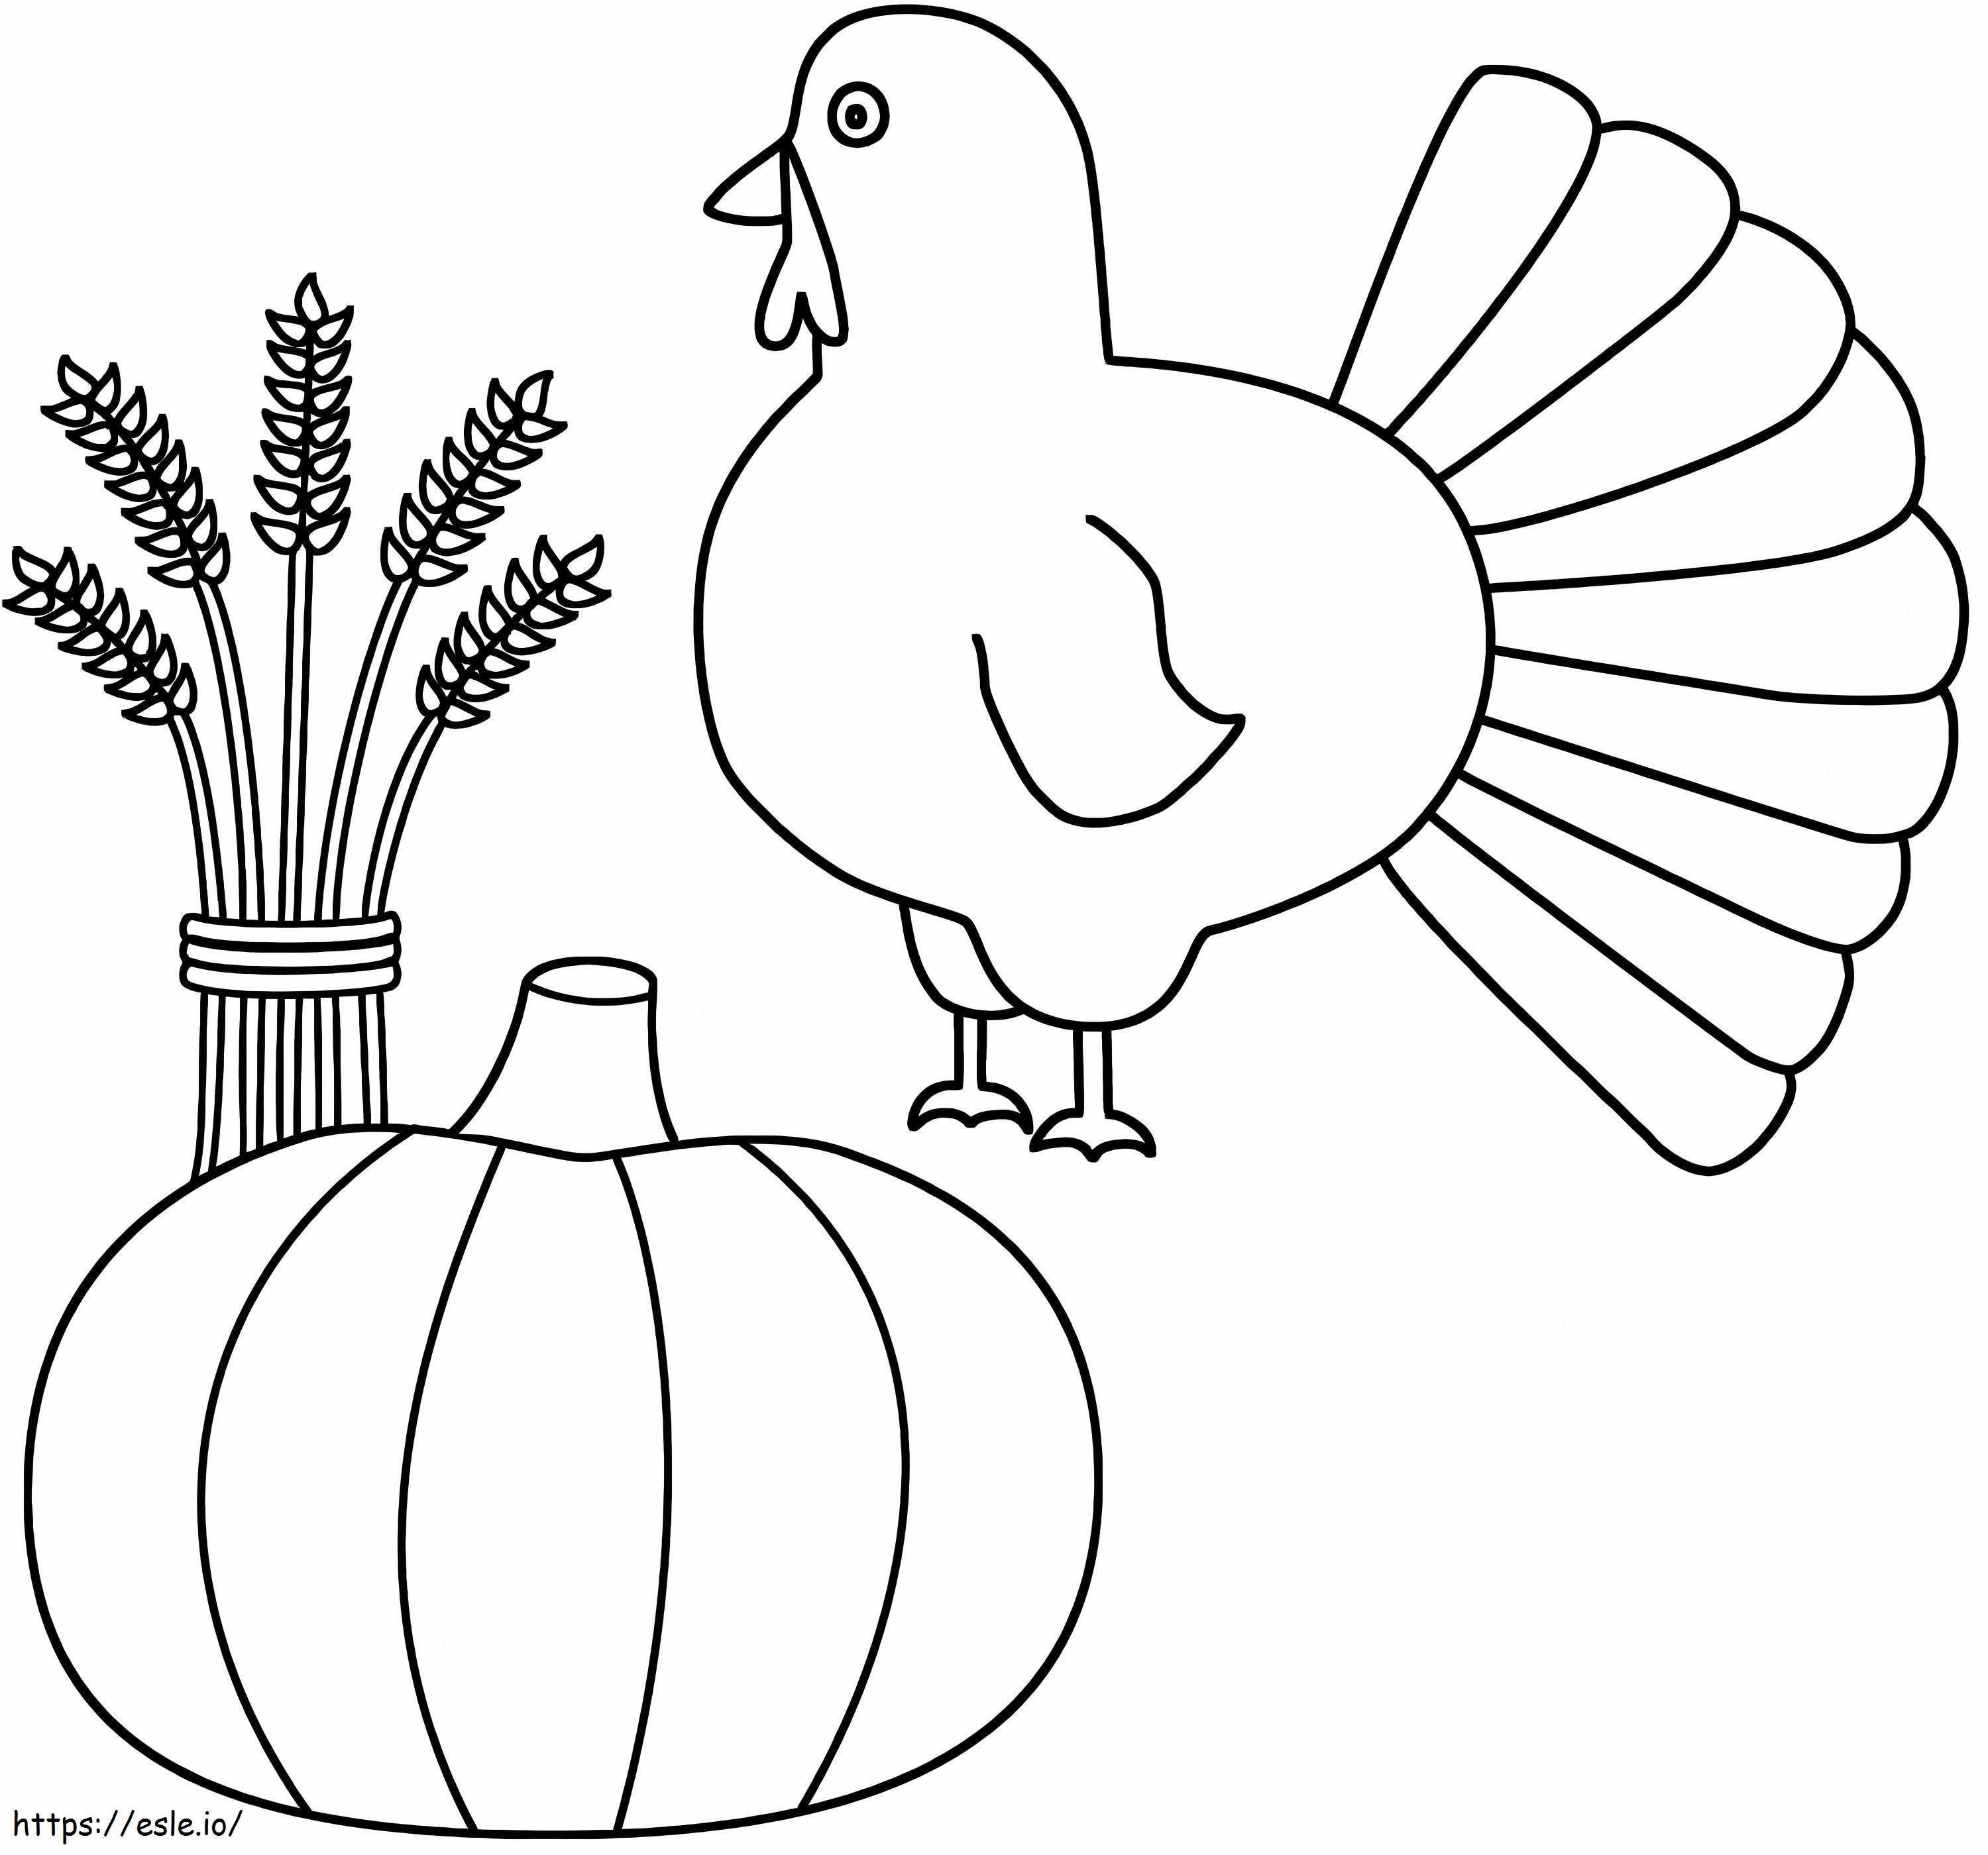 Turkey With Pumpkin And Sheaf Of Wheat coloring page